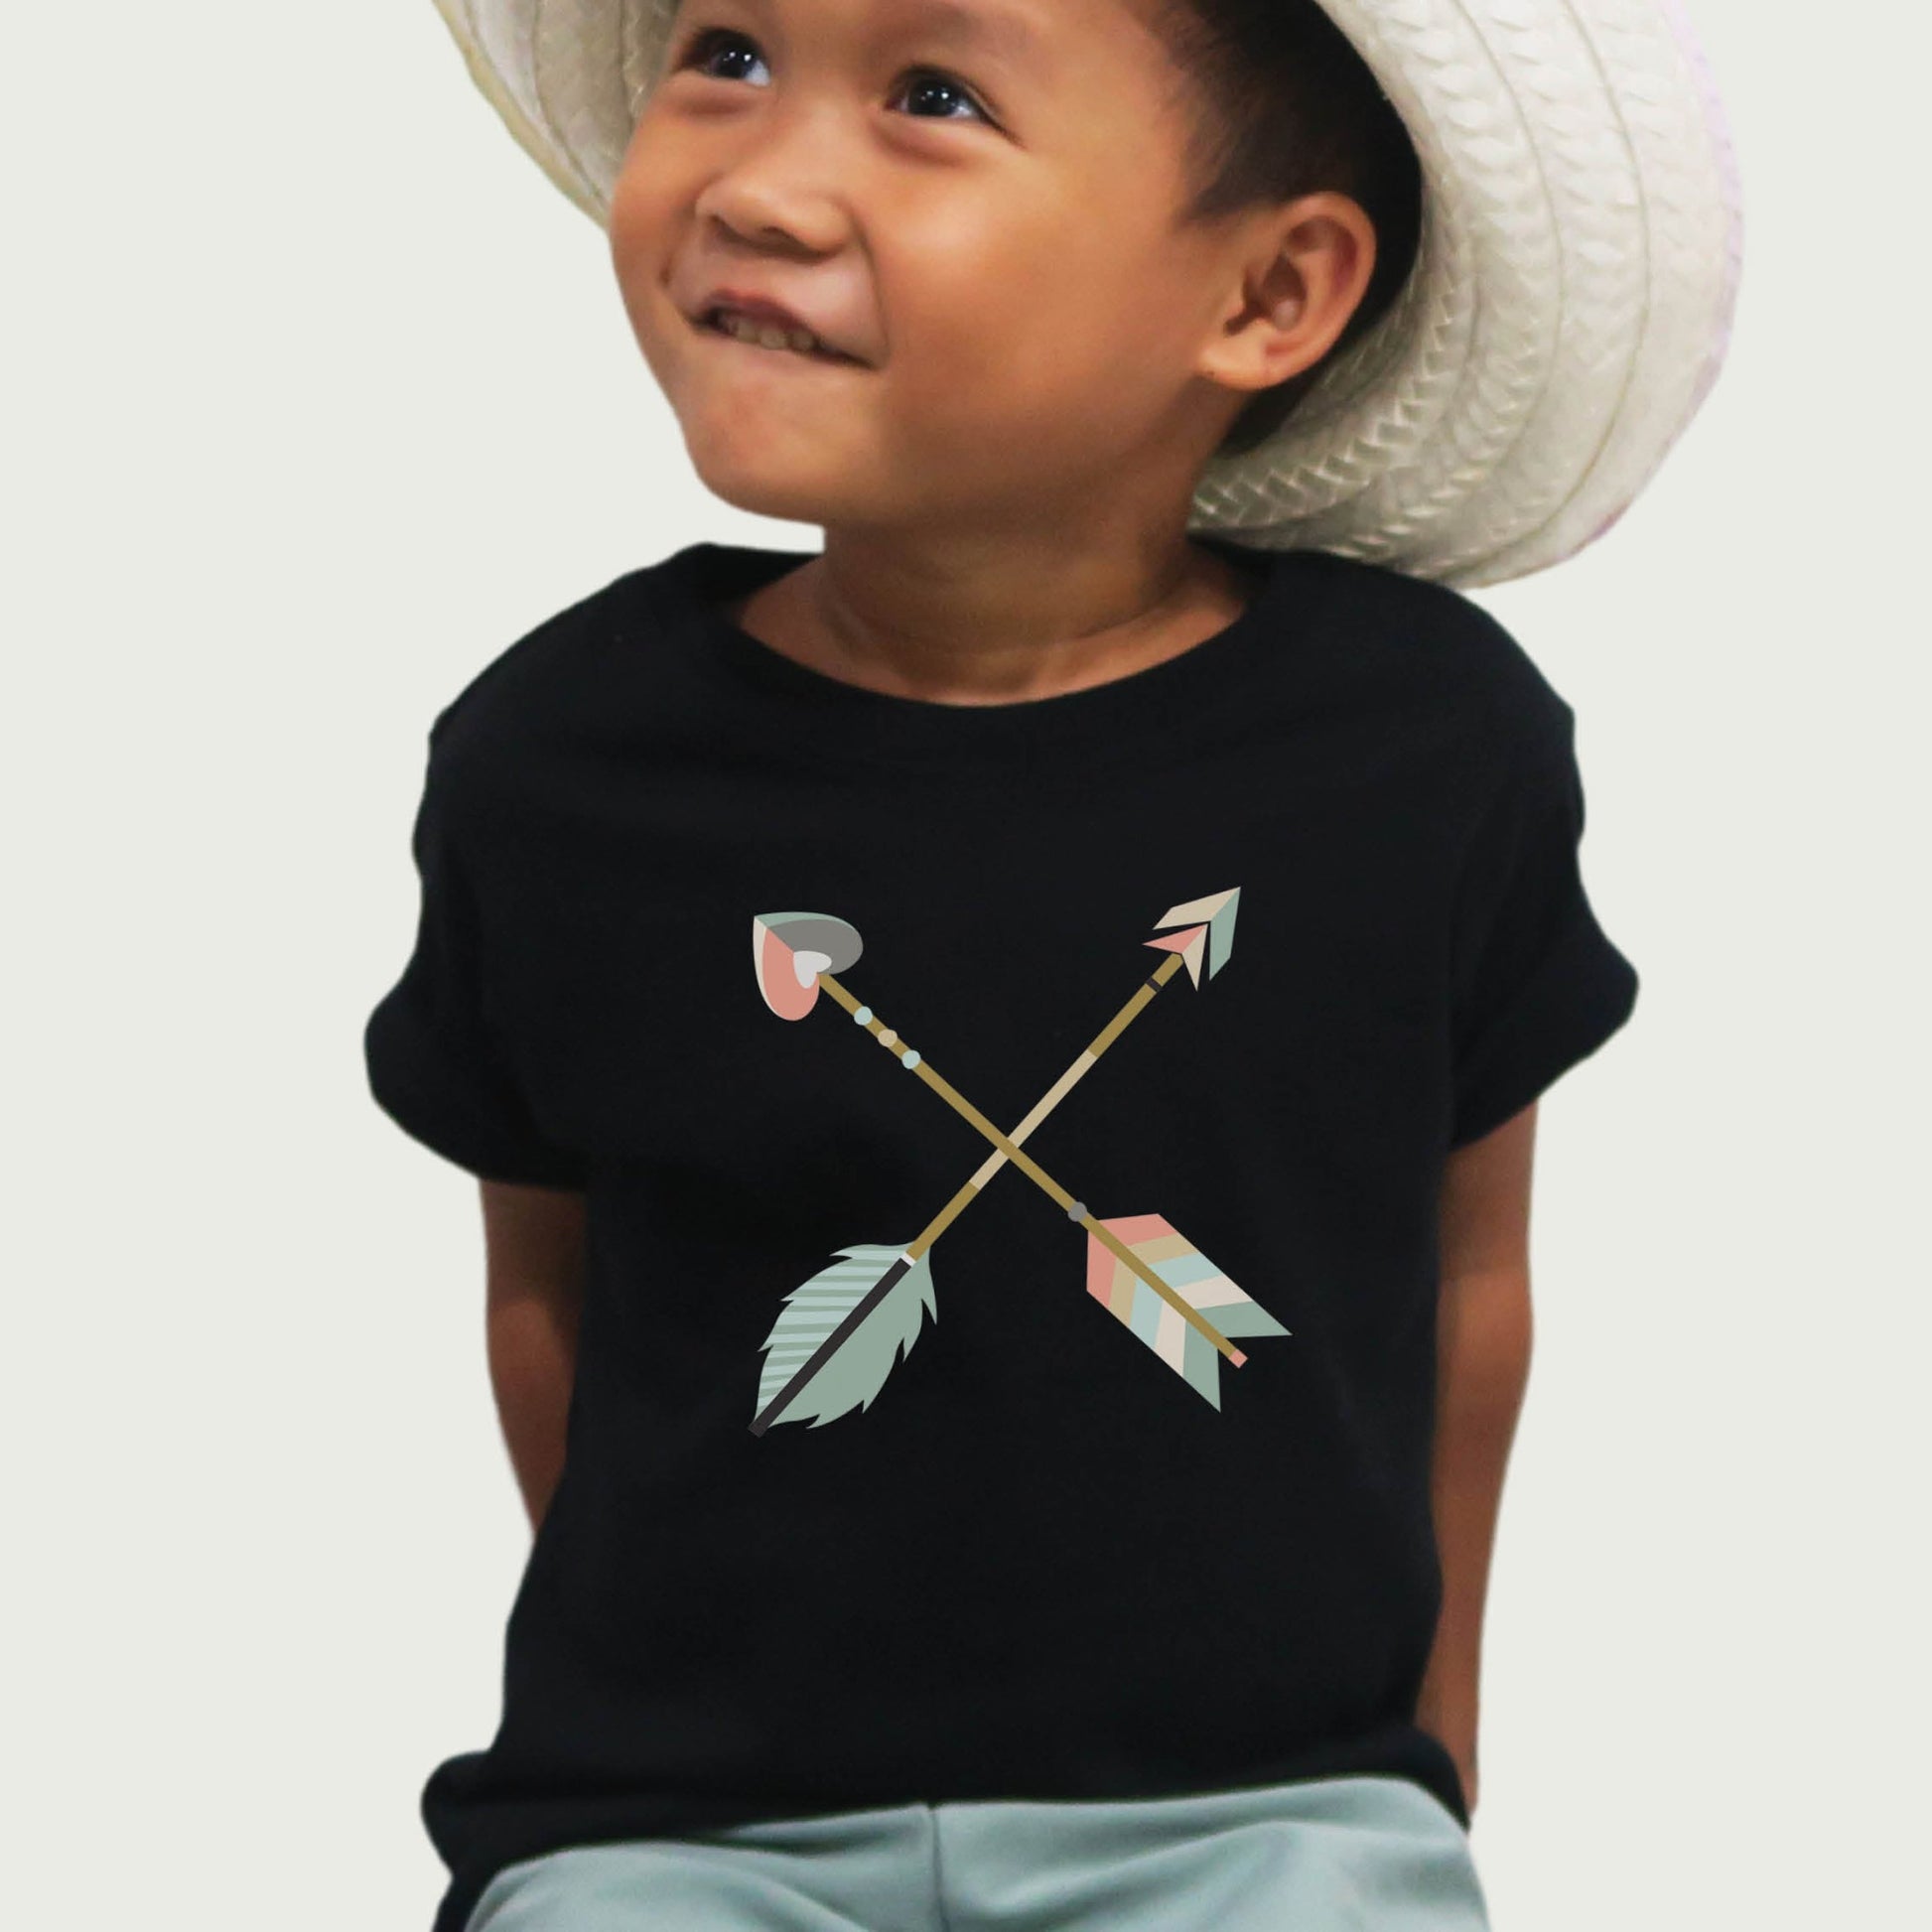 Black toddler size t-shirt with pastel criss-cross boho arrows, one with a heart on the end, to match Christian mom's womens' "Raising Arrows" Psalm 127:4-5 bible verse t-shirt for boys and girls